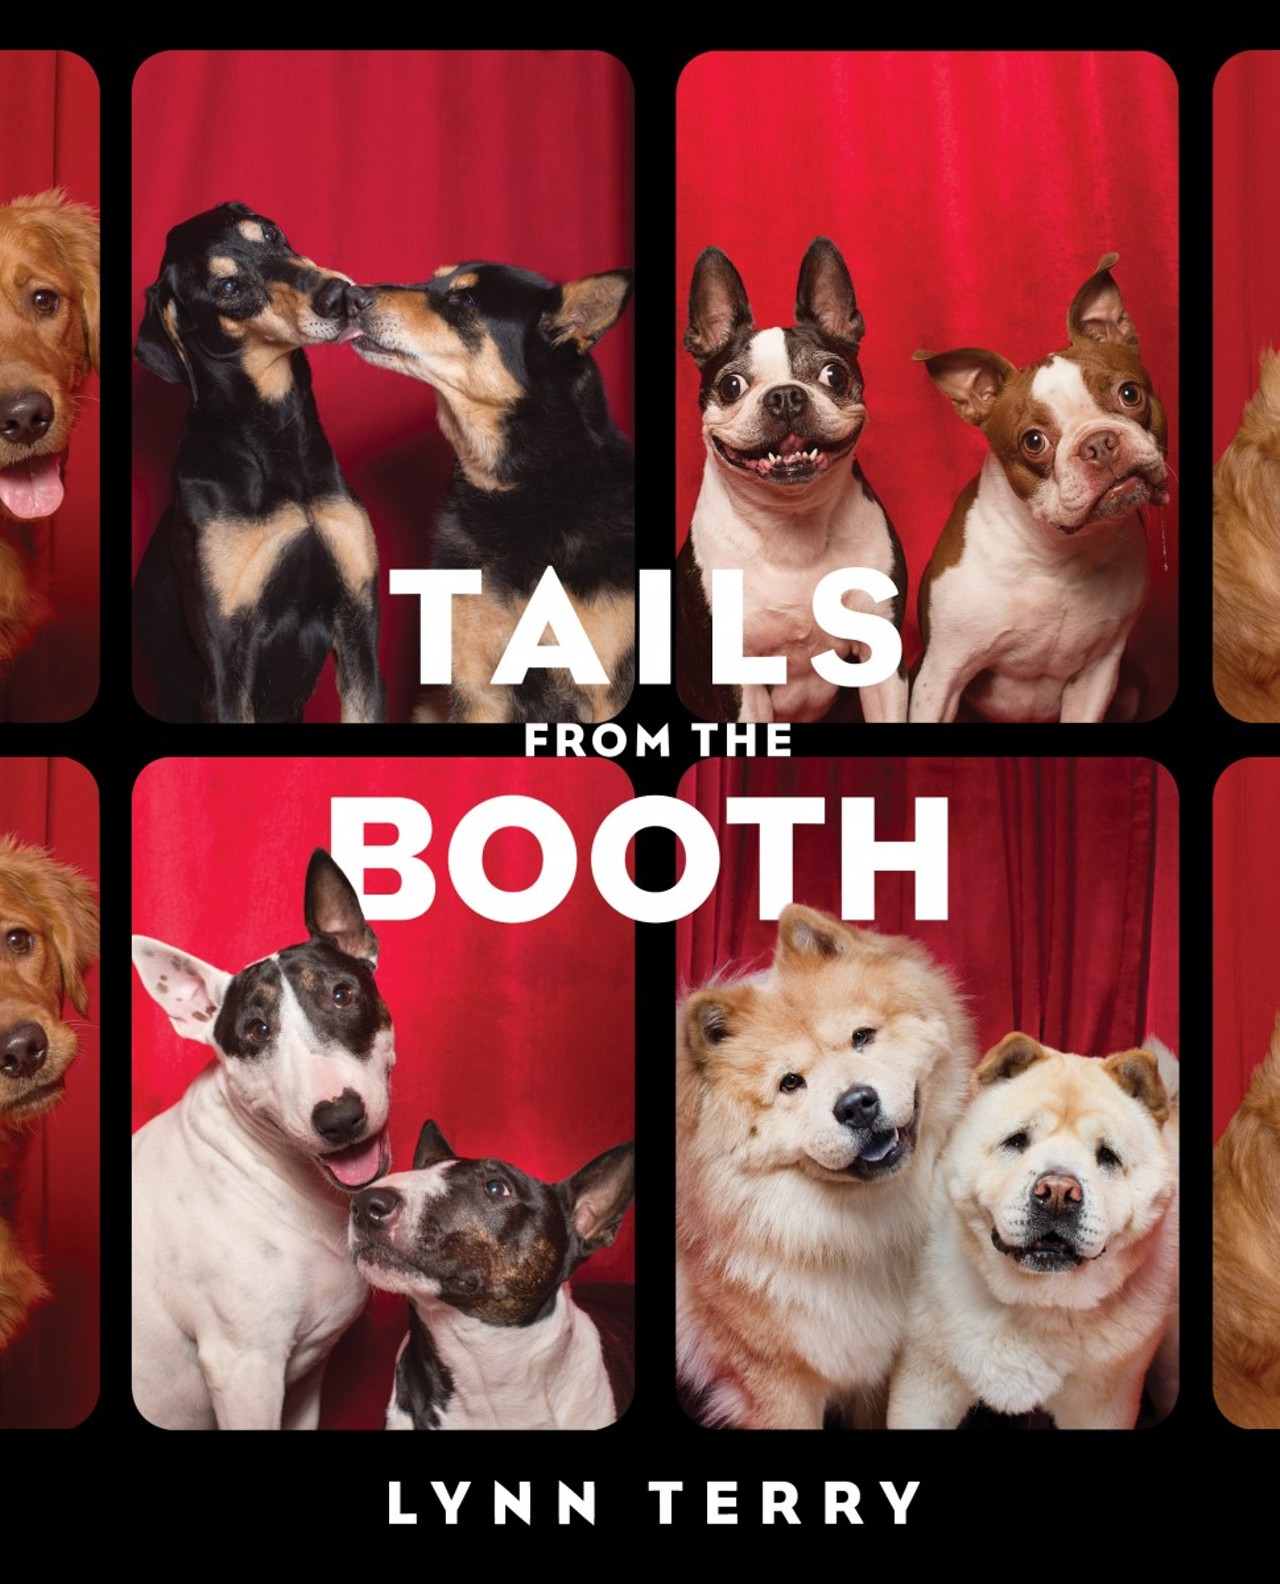 Tails From the Booth, by St. Louisan Lynn Terry, was released October 20 by Gallery Books.